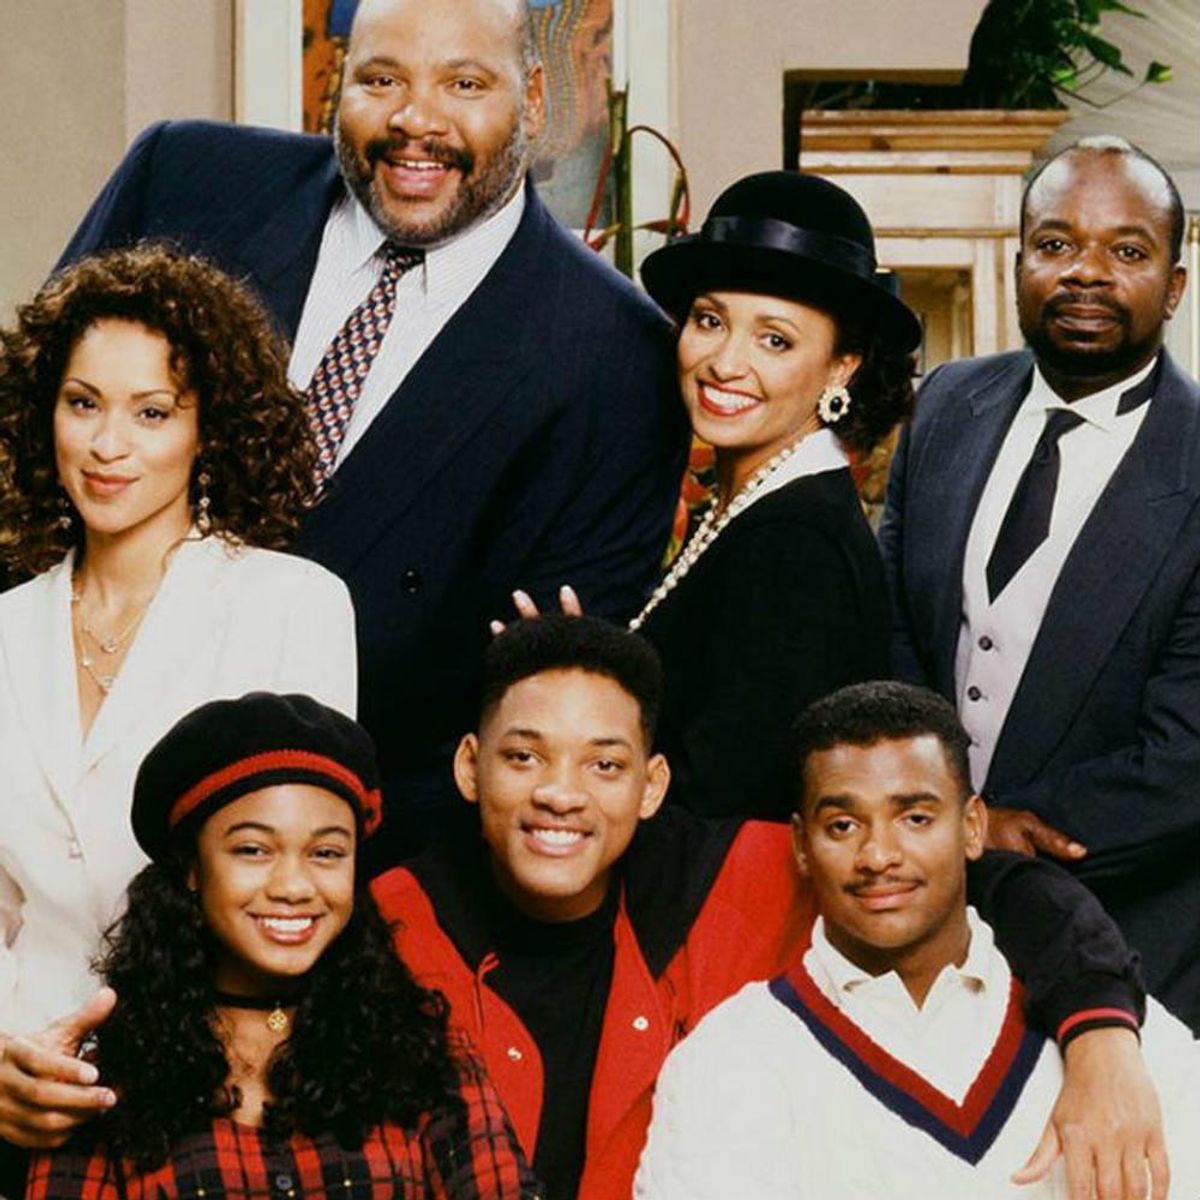 TV Shows from the ’90s That Are Even Better Today